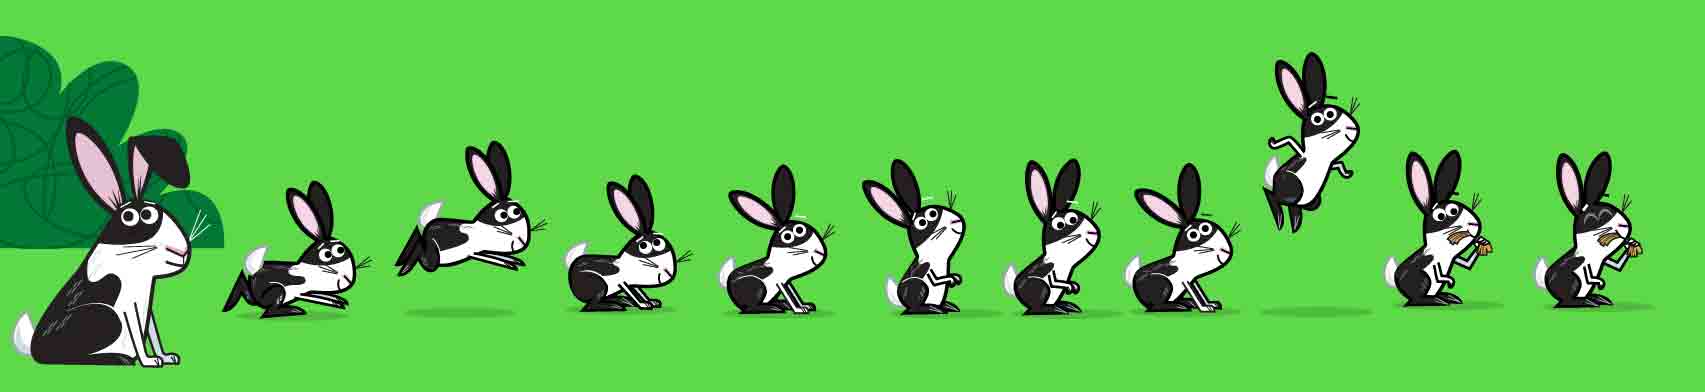 cute animated bunnies playing leapfrog